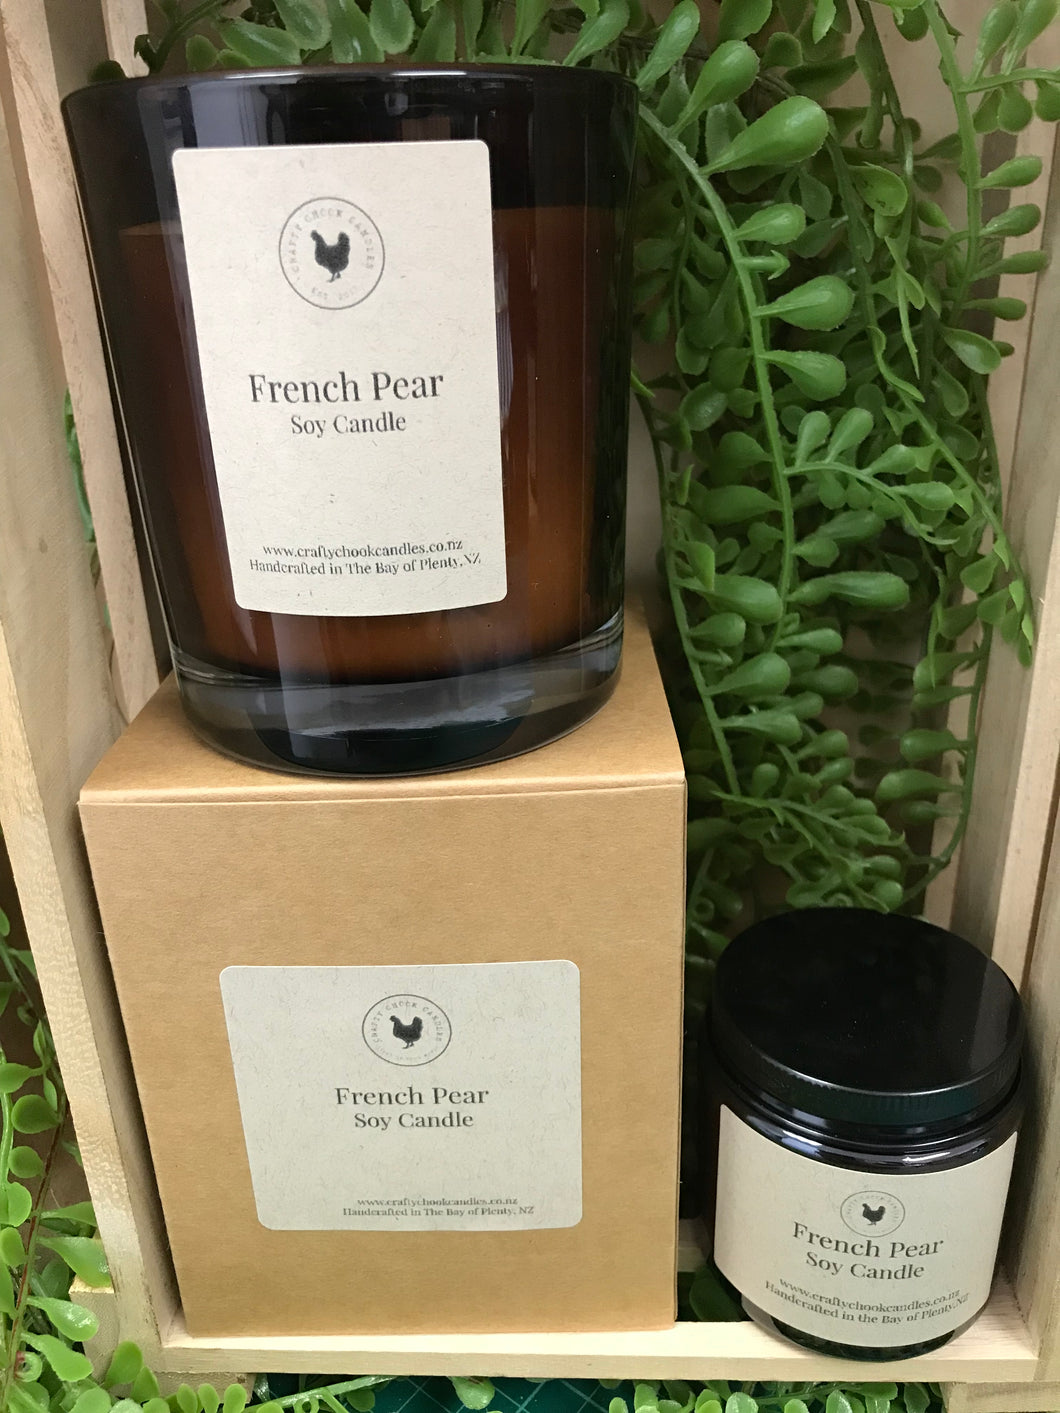 Crafty Chook Candle - French Pear